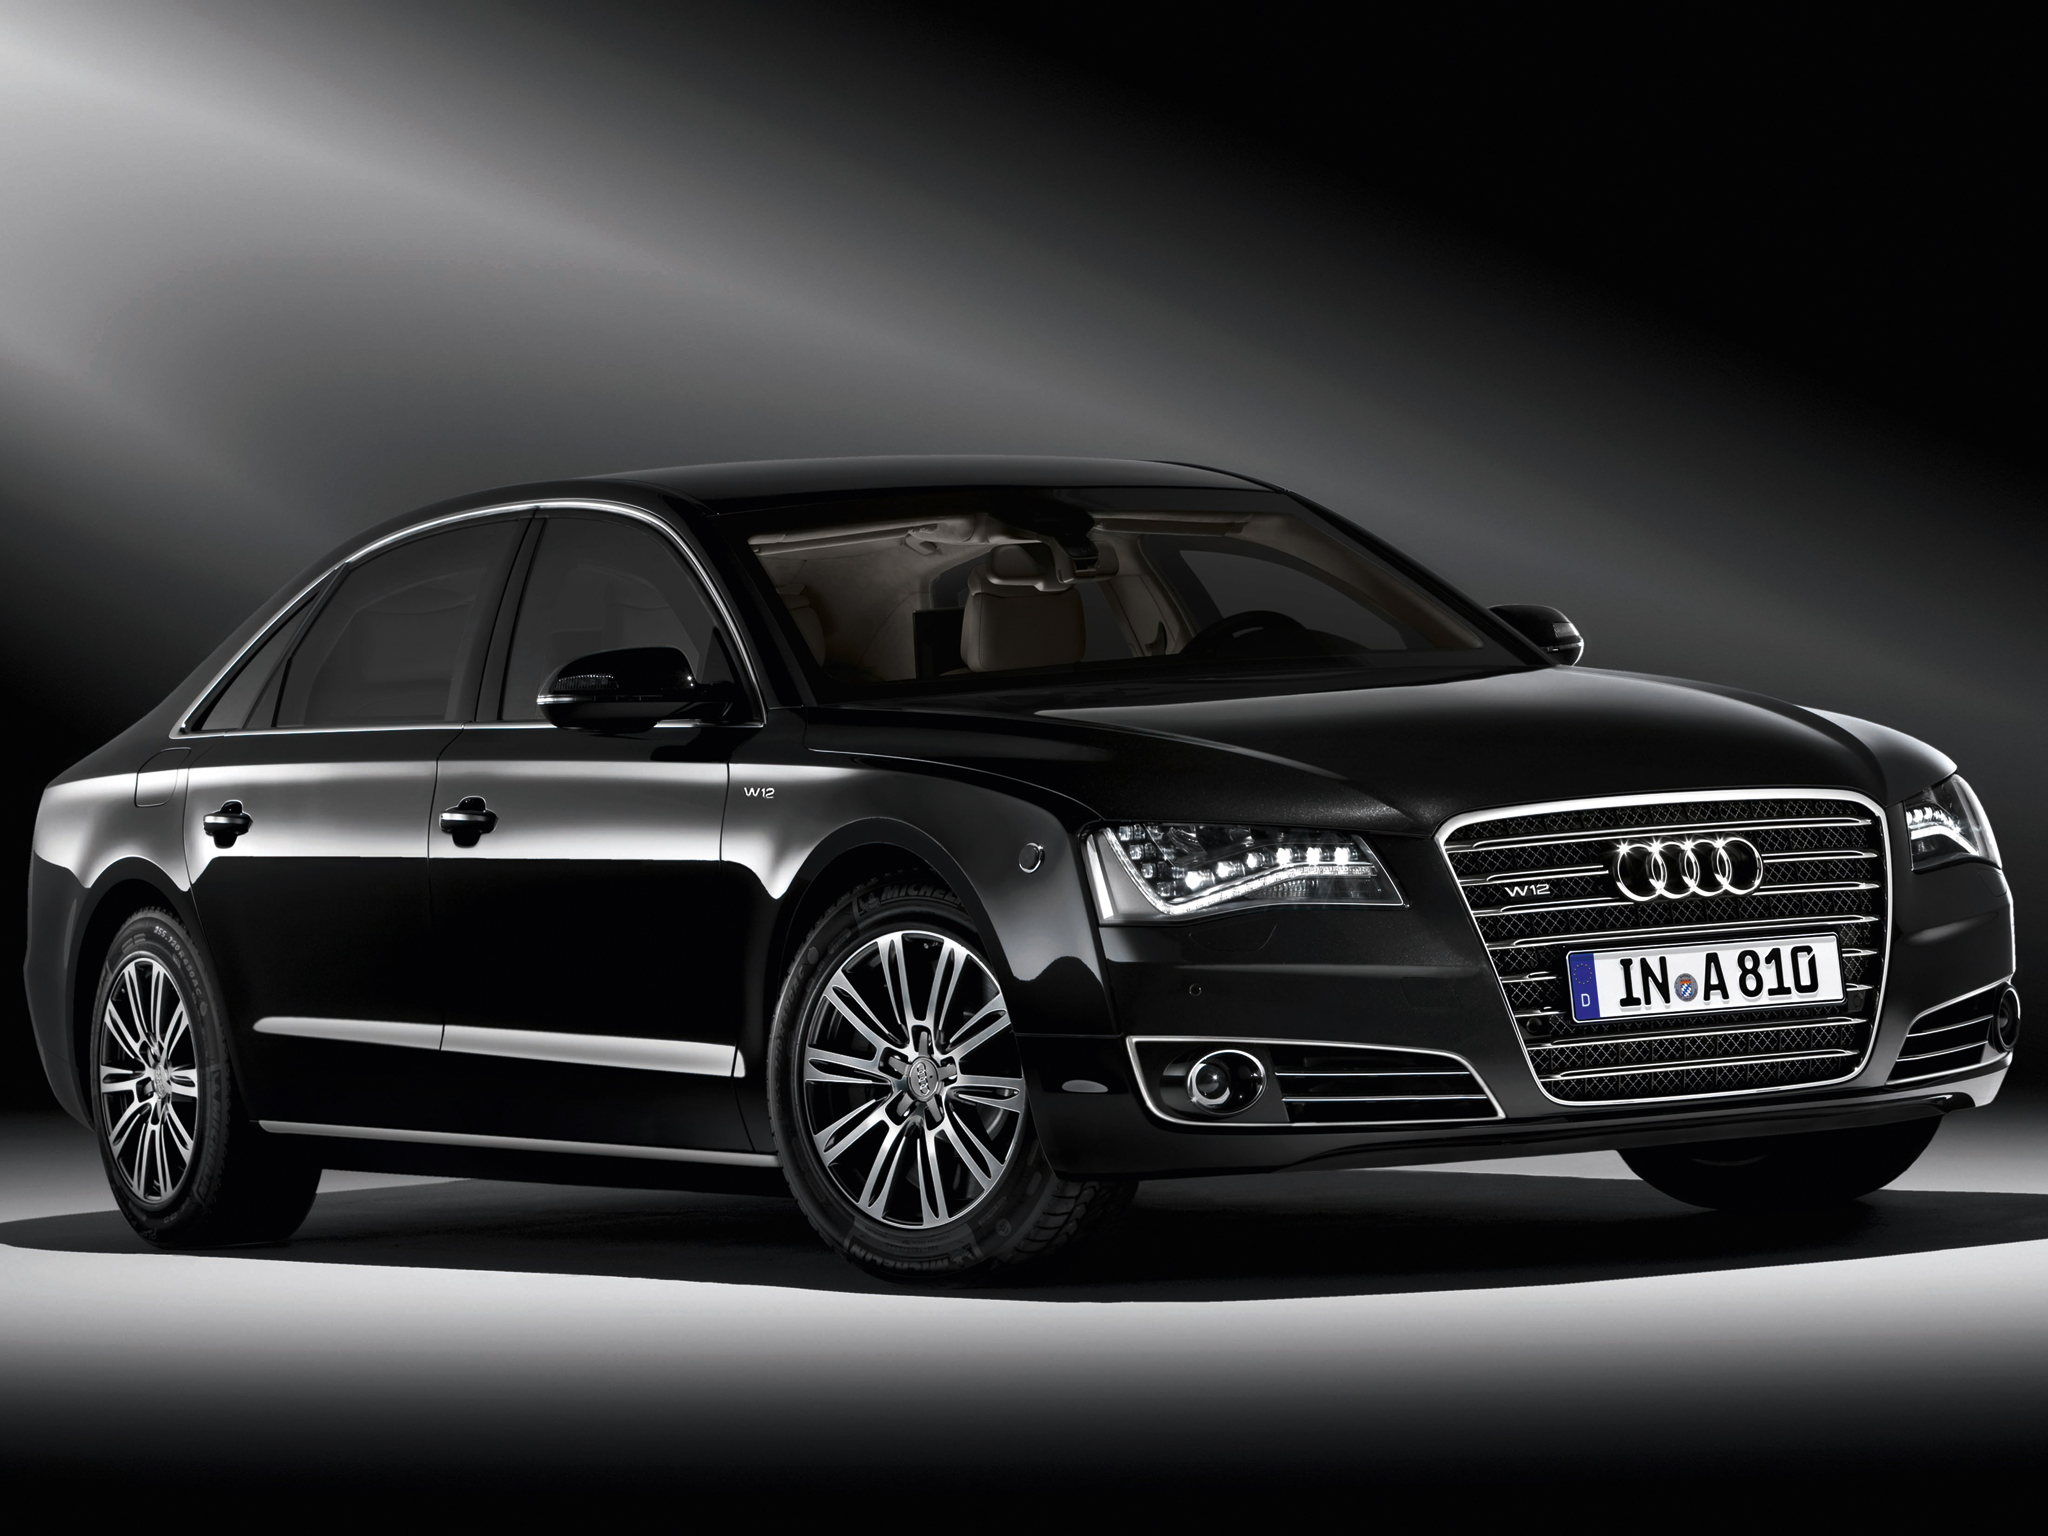 2011, Armored, Audi, A8l, W12, Security, D 4, Luxury Wallpaper